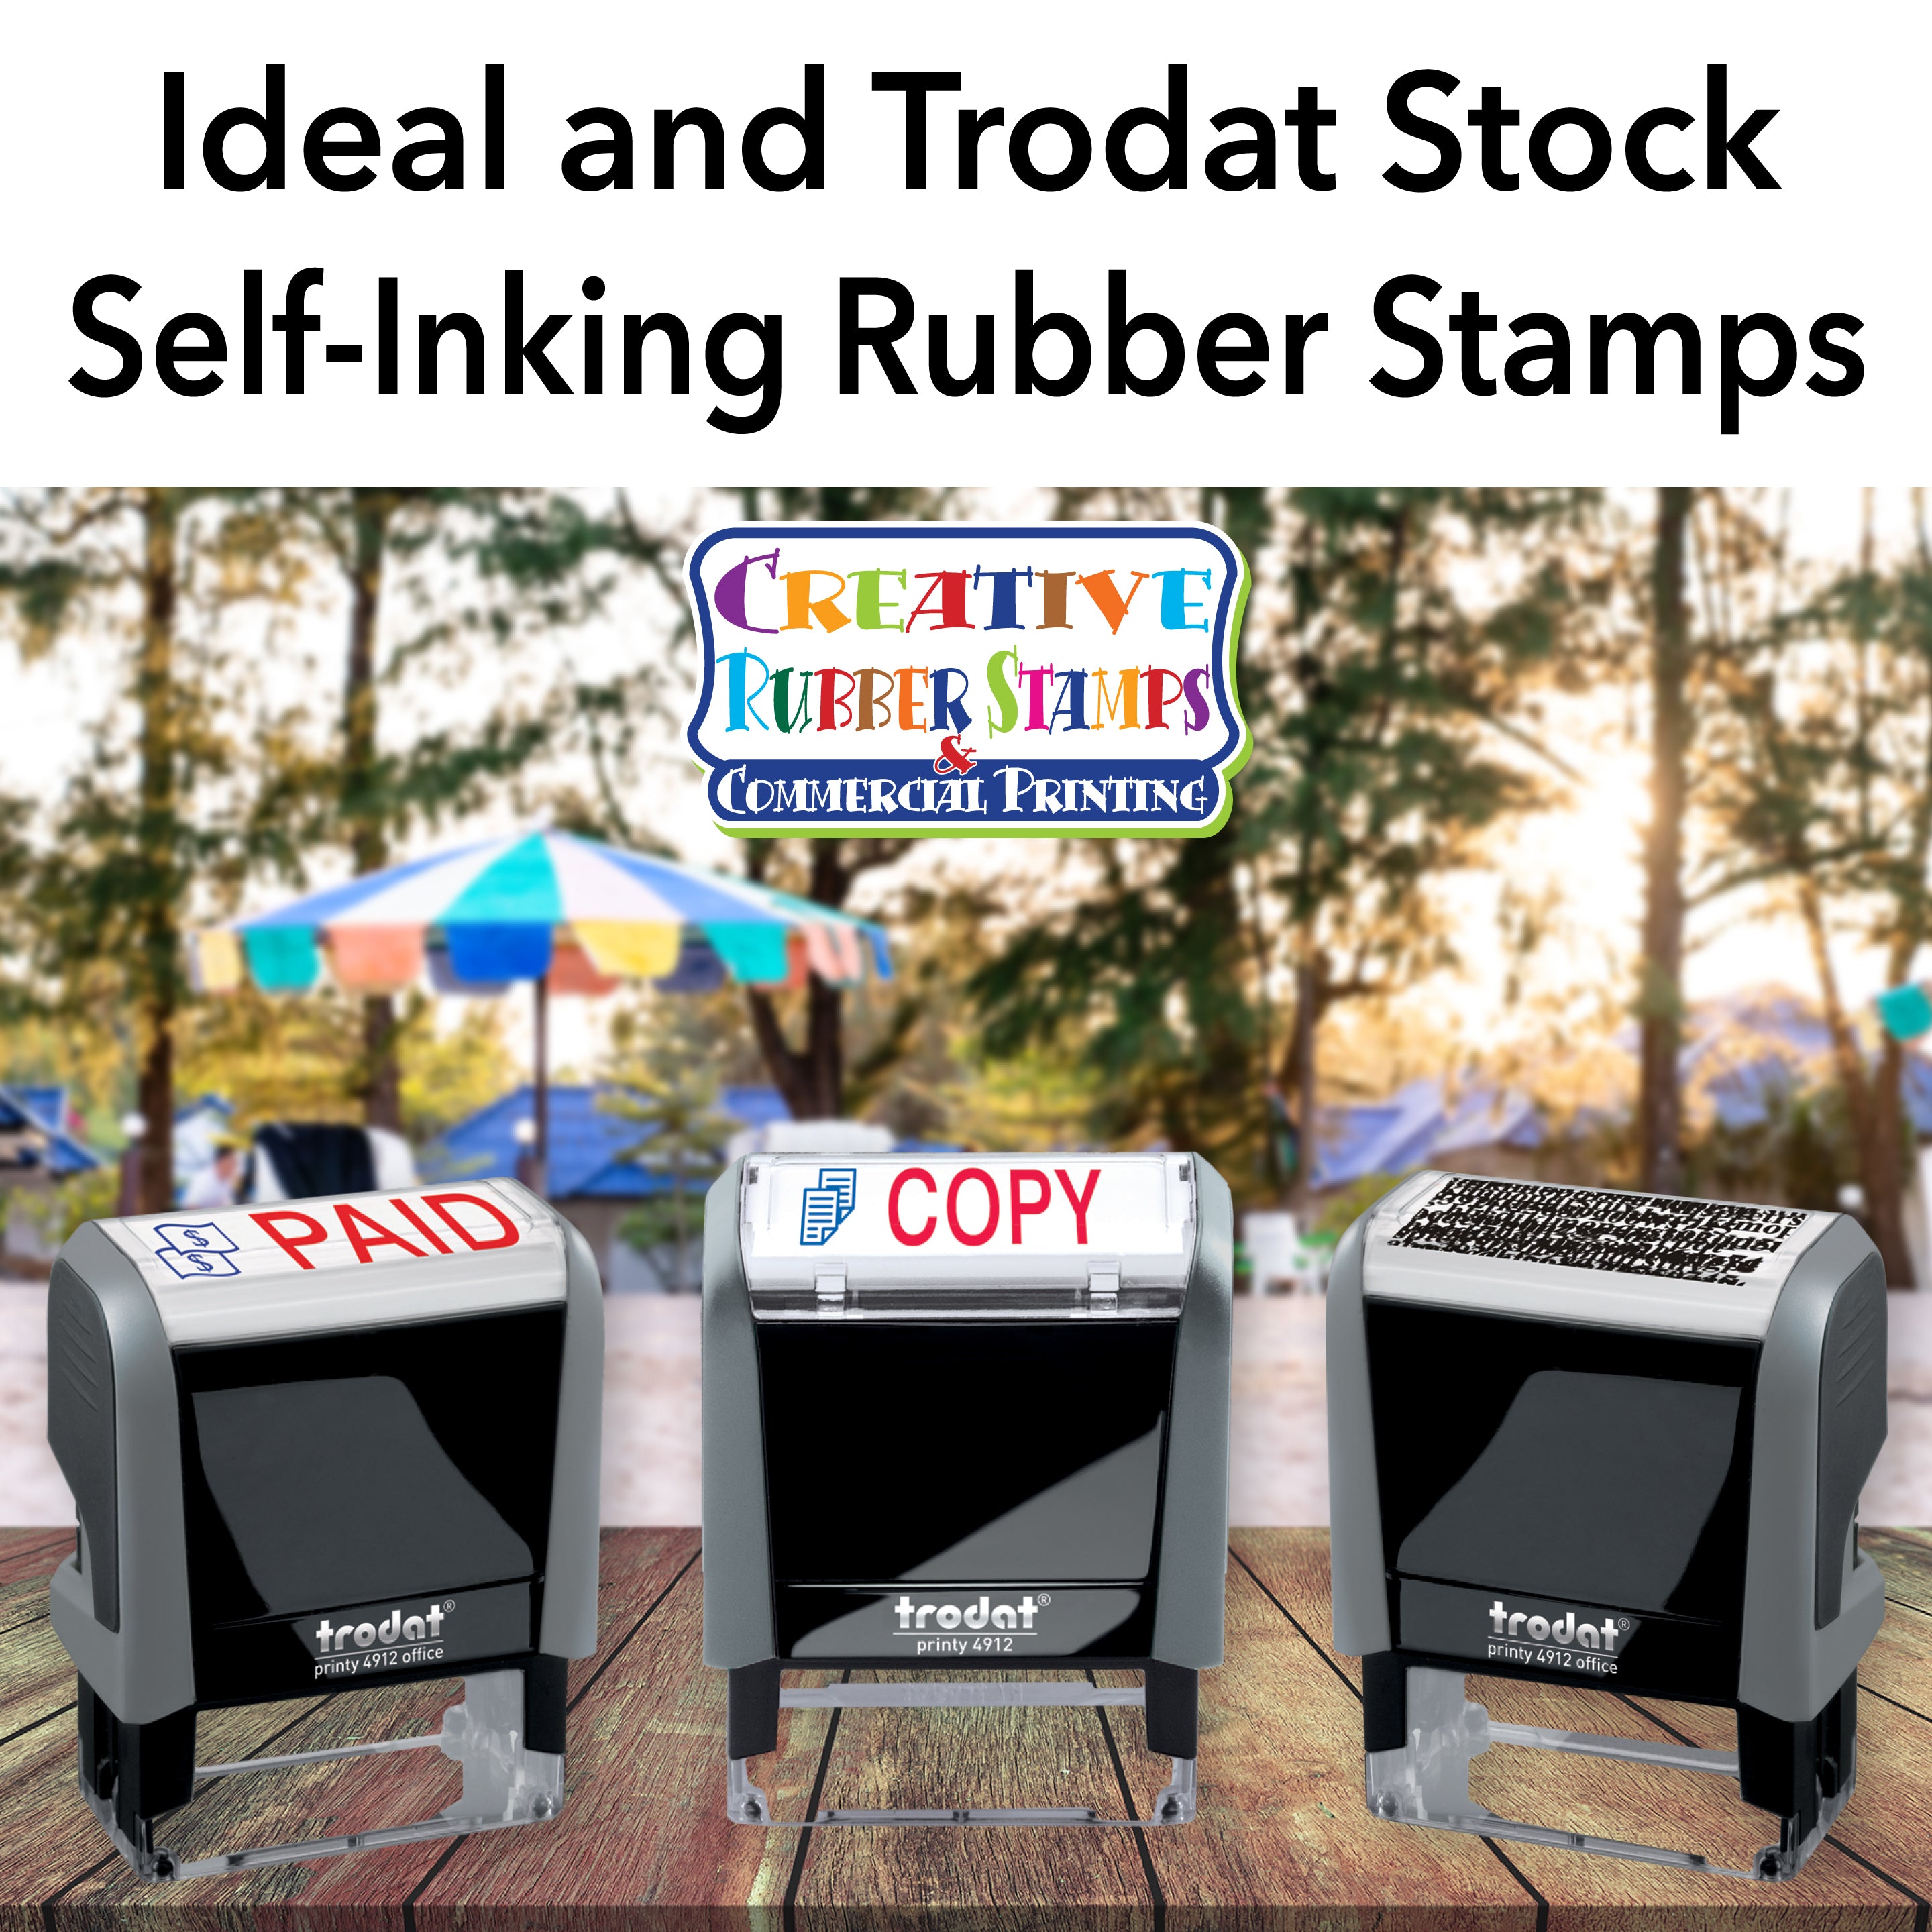 Ideal and Trodat Stock Self-Inking Rubber Stamps